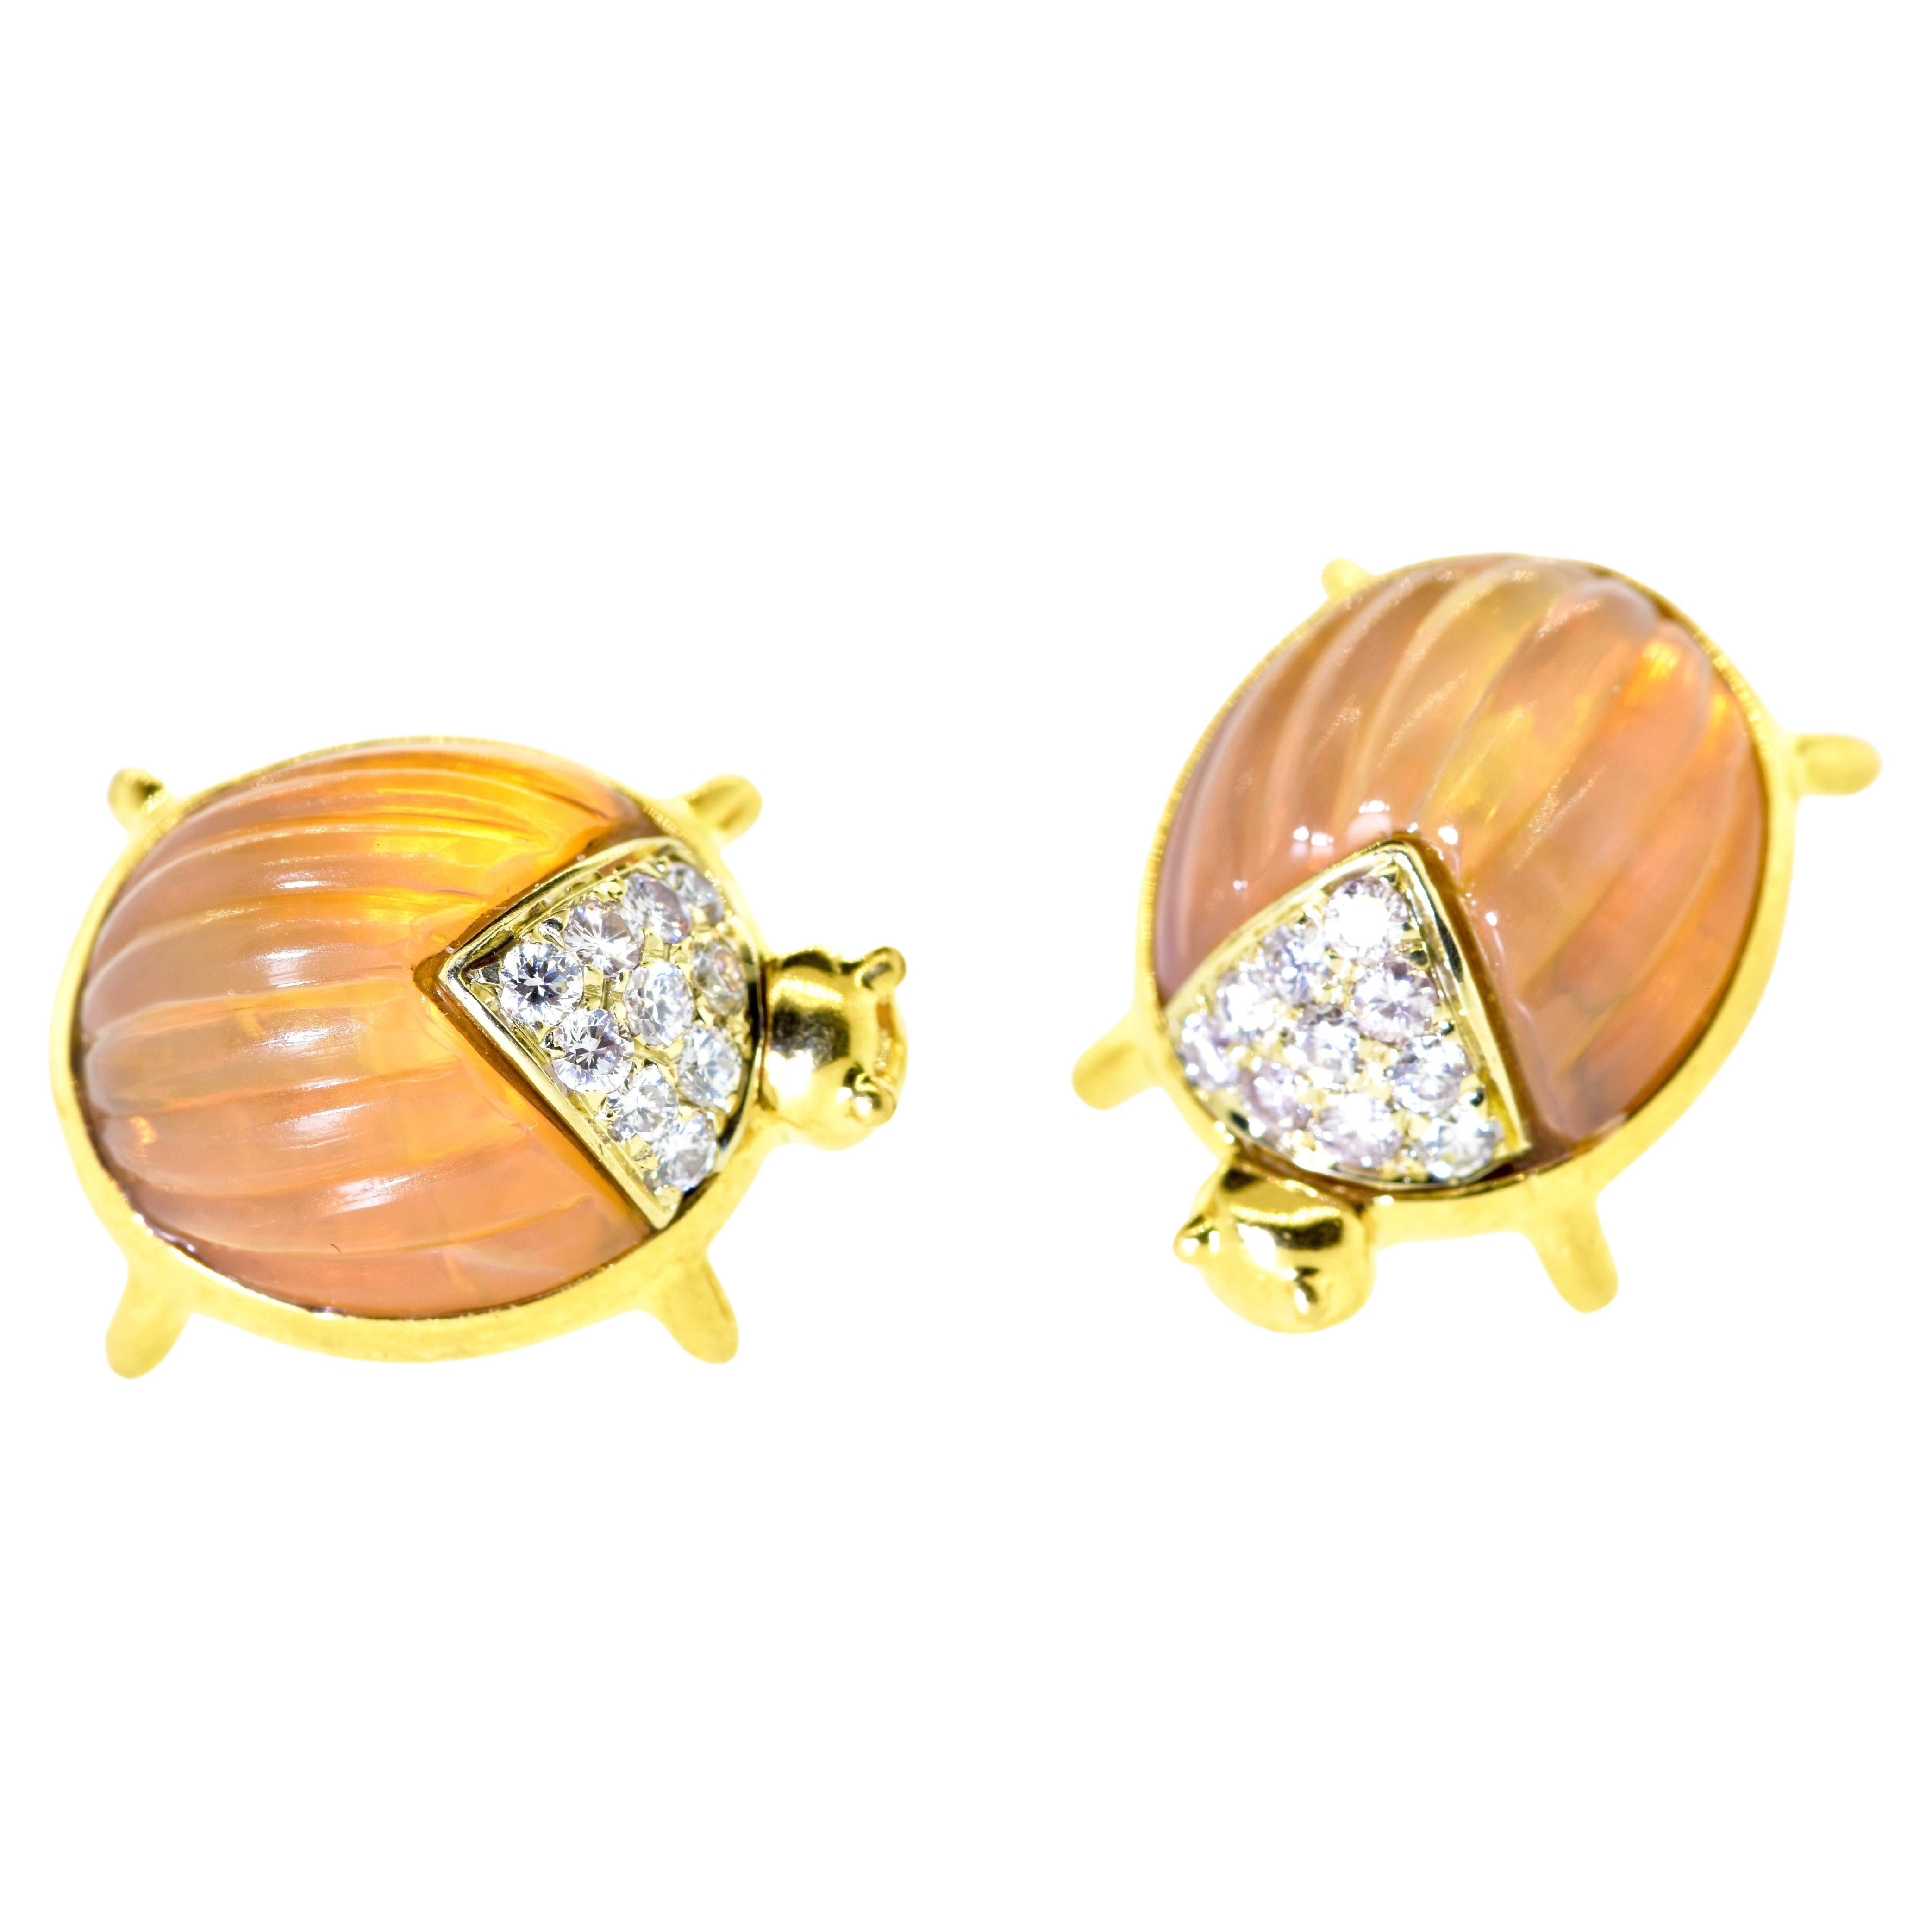 18K Lady Bug Earrings with fine Diamonds and Translucent Agate.